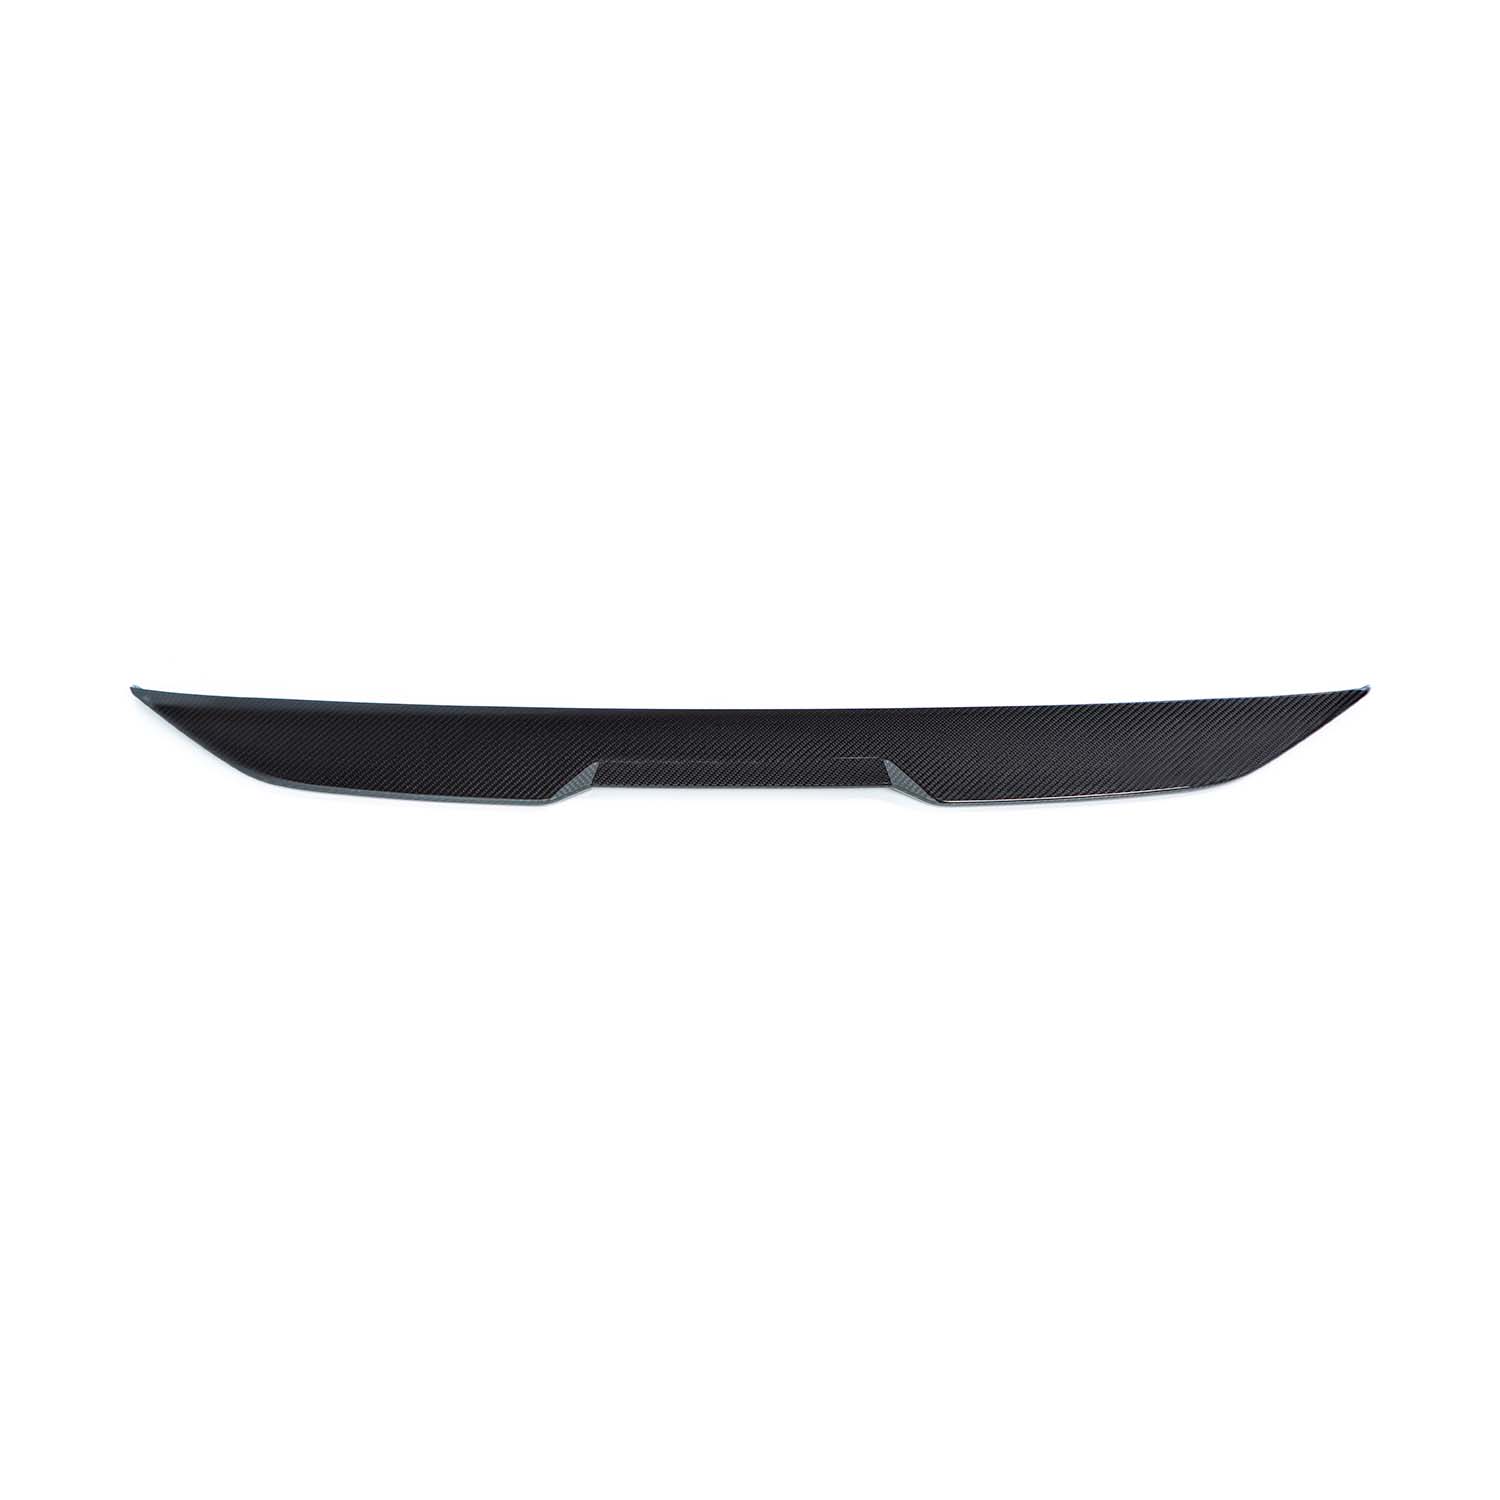 M Performance Rear Spoiler Lip for BMW 2 Series M240i G42 (2021+) in Carbon Fibre-R44 Performance